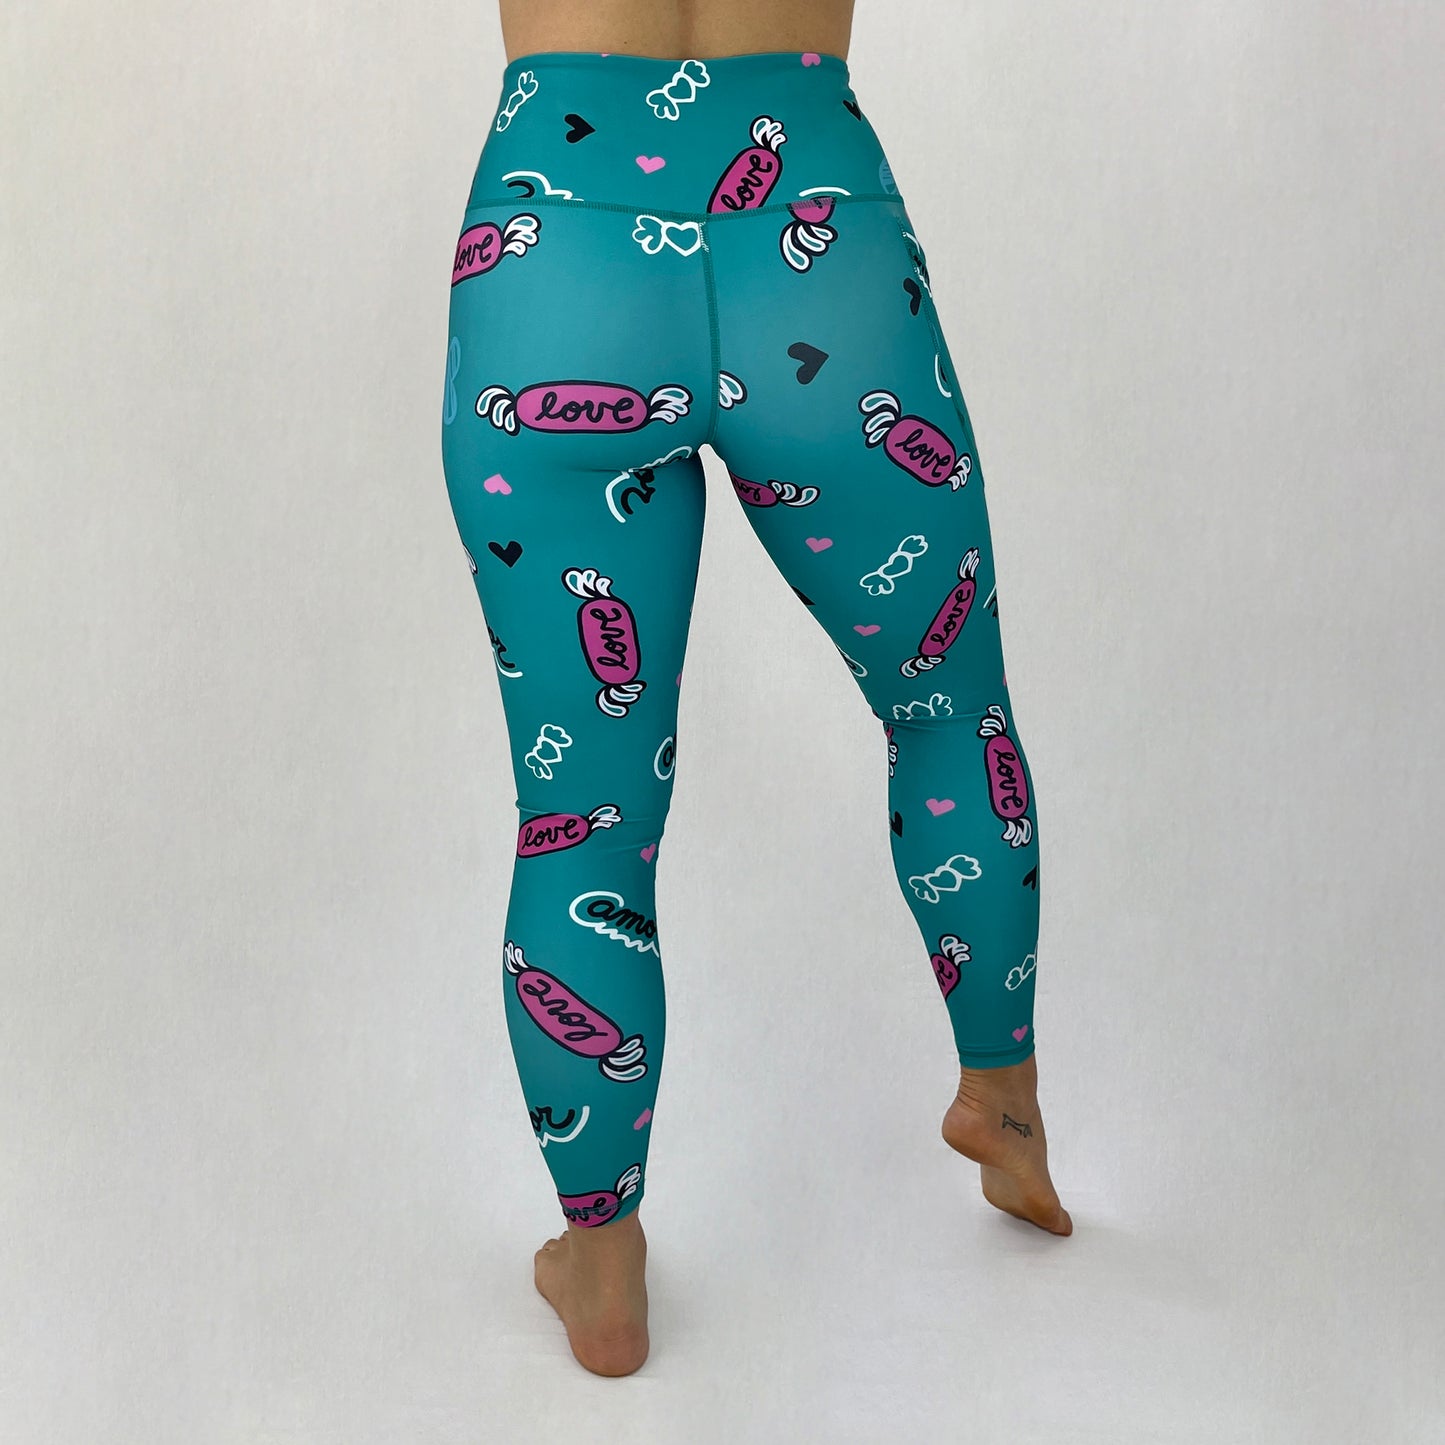 Ethical High Waisted full length Leggings Oda in Love by Monique Baqués back